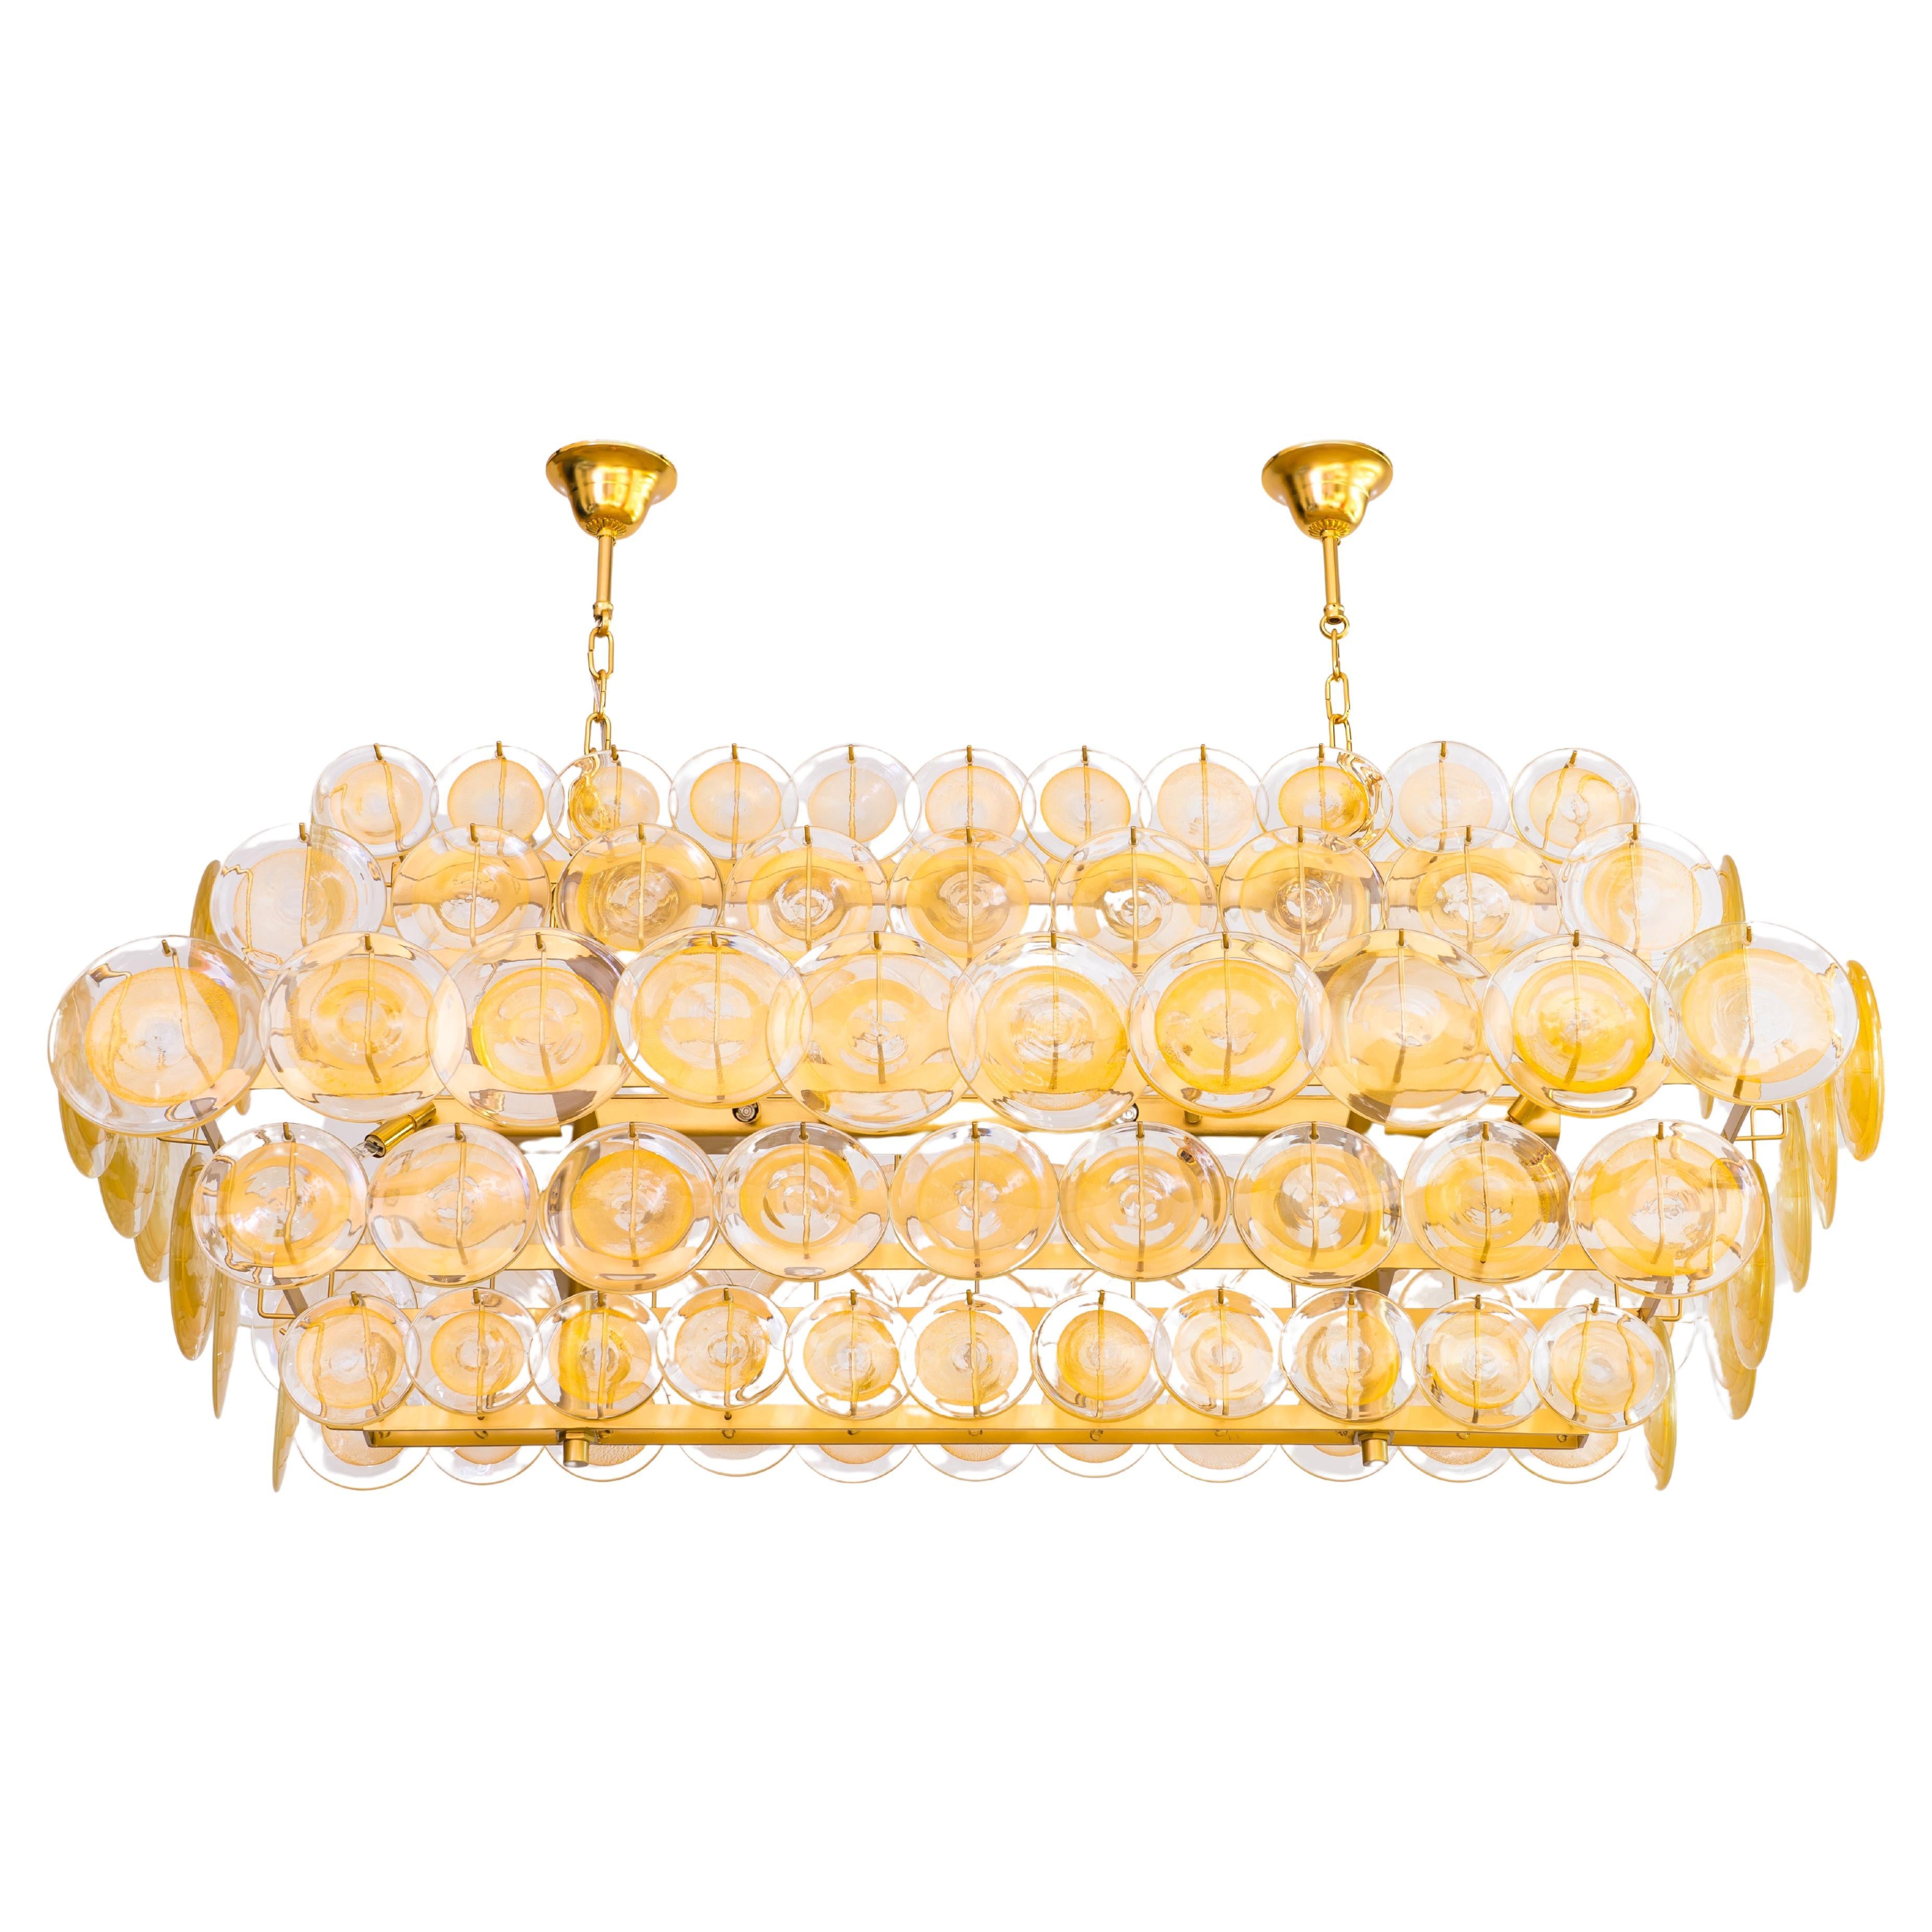 Absolute Gold Chandelier with Plates in Murano Glass and Gold Leaf Italy 1990s.
This stunning chandelier is a must-have for all gold lovers: entirely handcrafted of Murano glass and gold-plated metal in the 1990s, this luxurious piece of art is